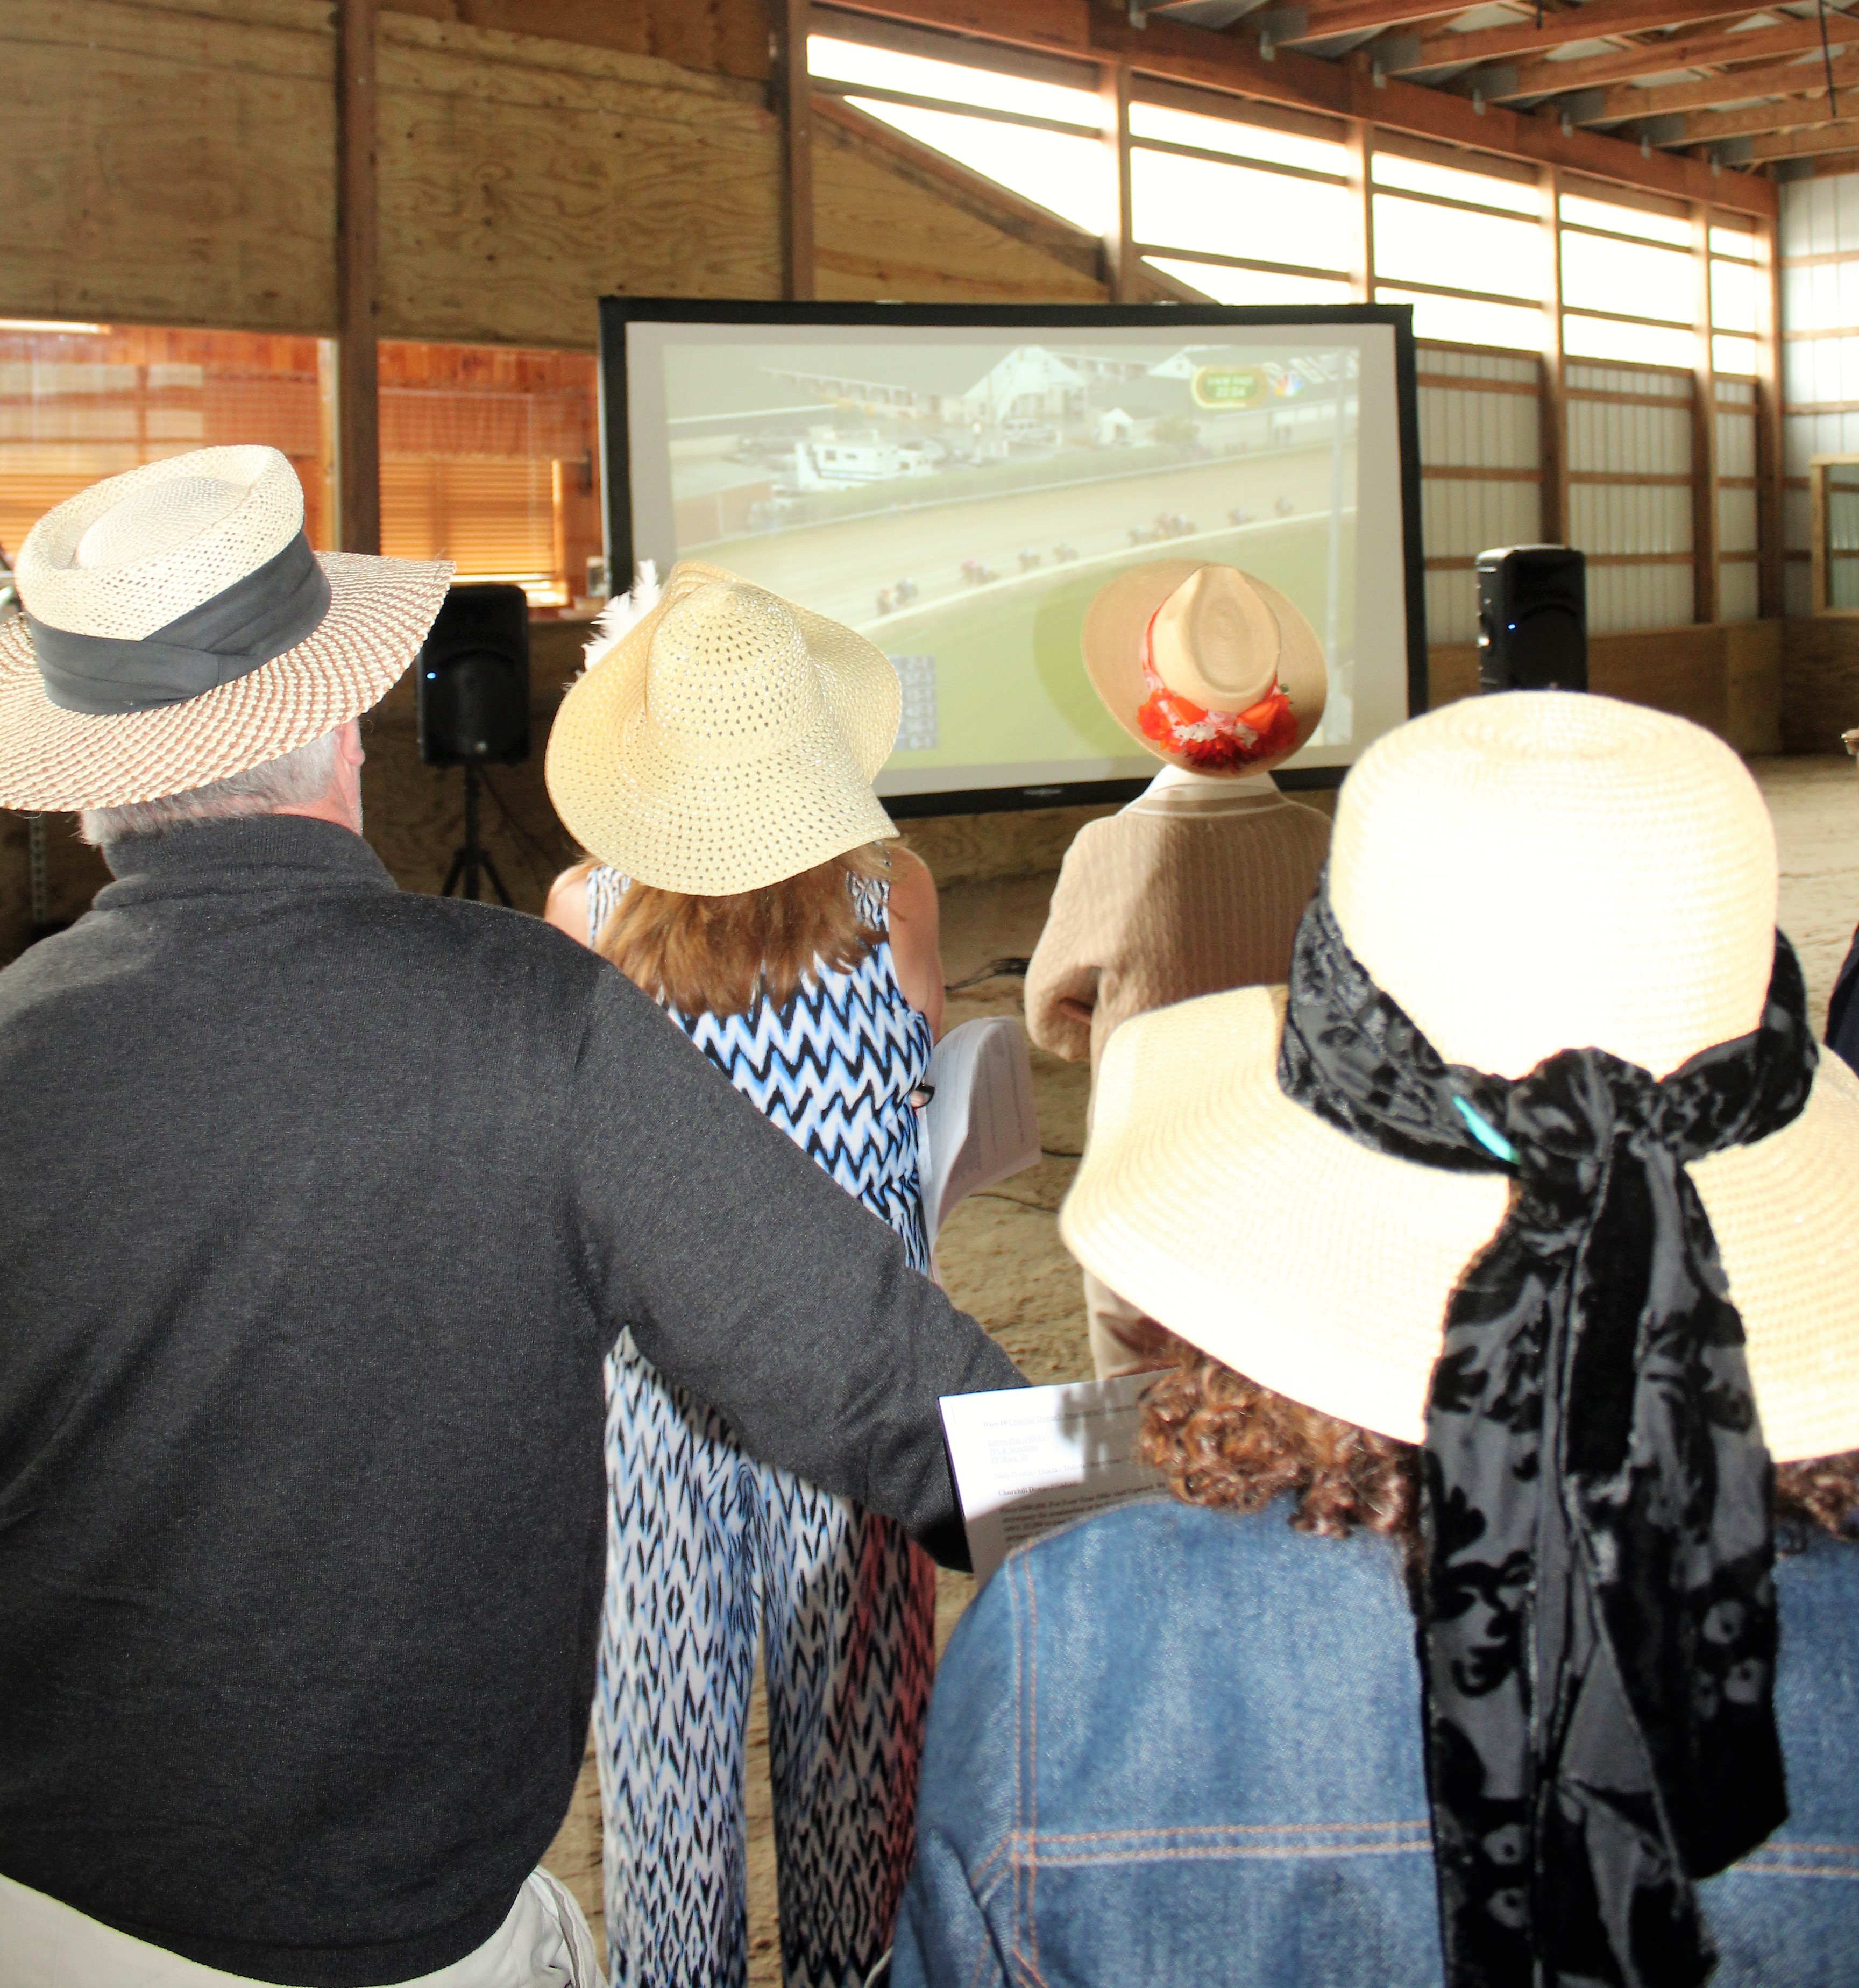 Derby fans watch the horses round the track enjoying the day and raising money at The Branches Kentucky Derby fundraising party May 6.